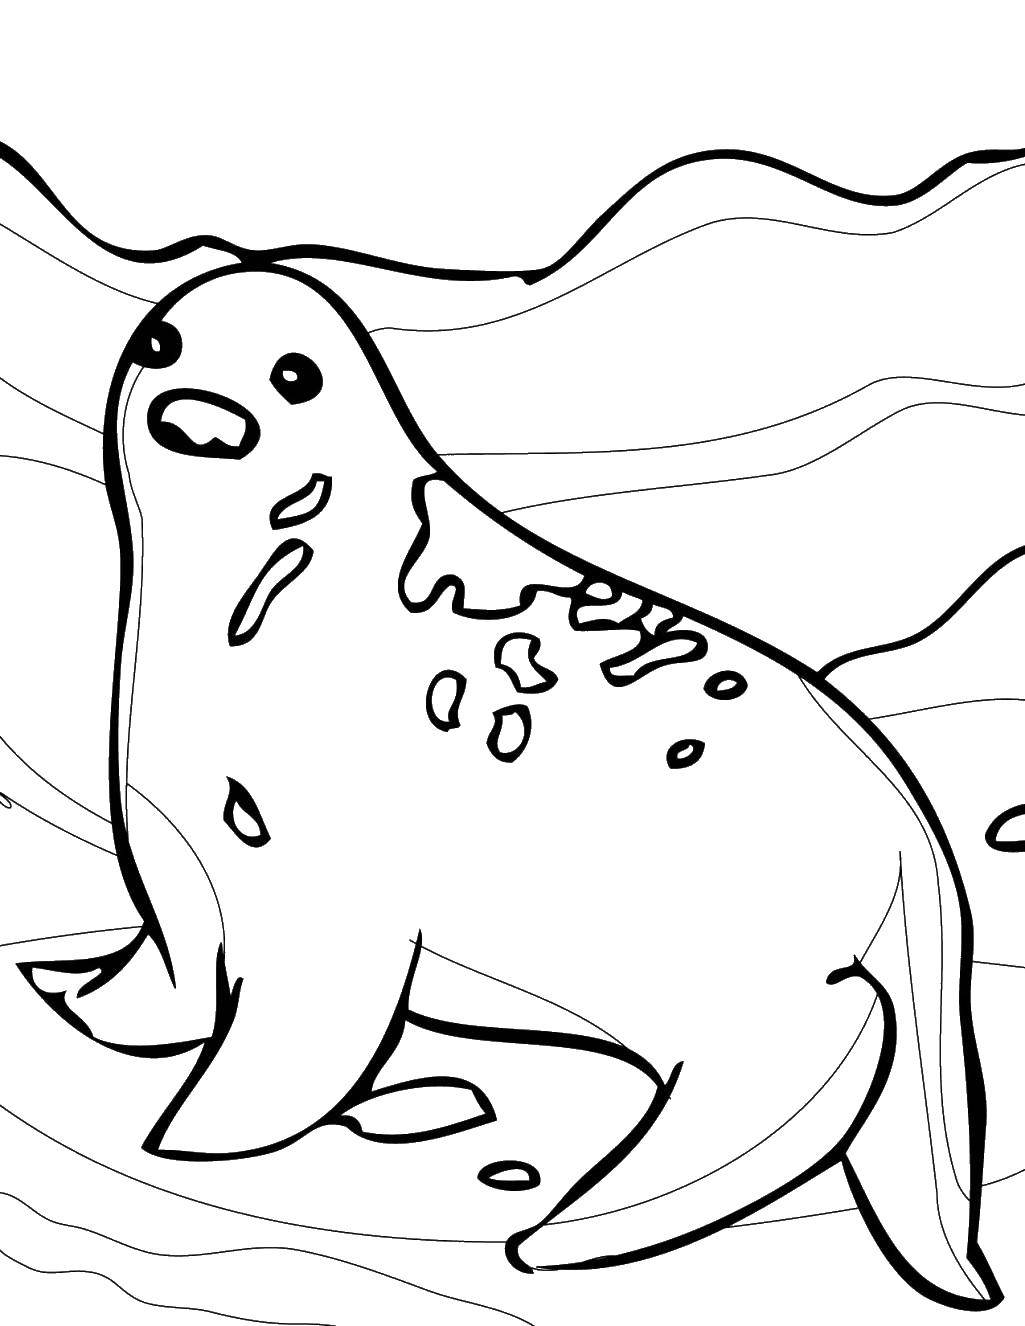 Coloring Seal. Category wild animals. Tags:  the seal on the ice.